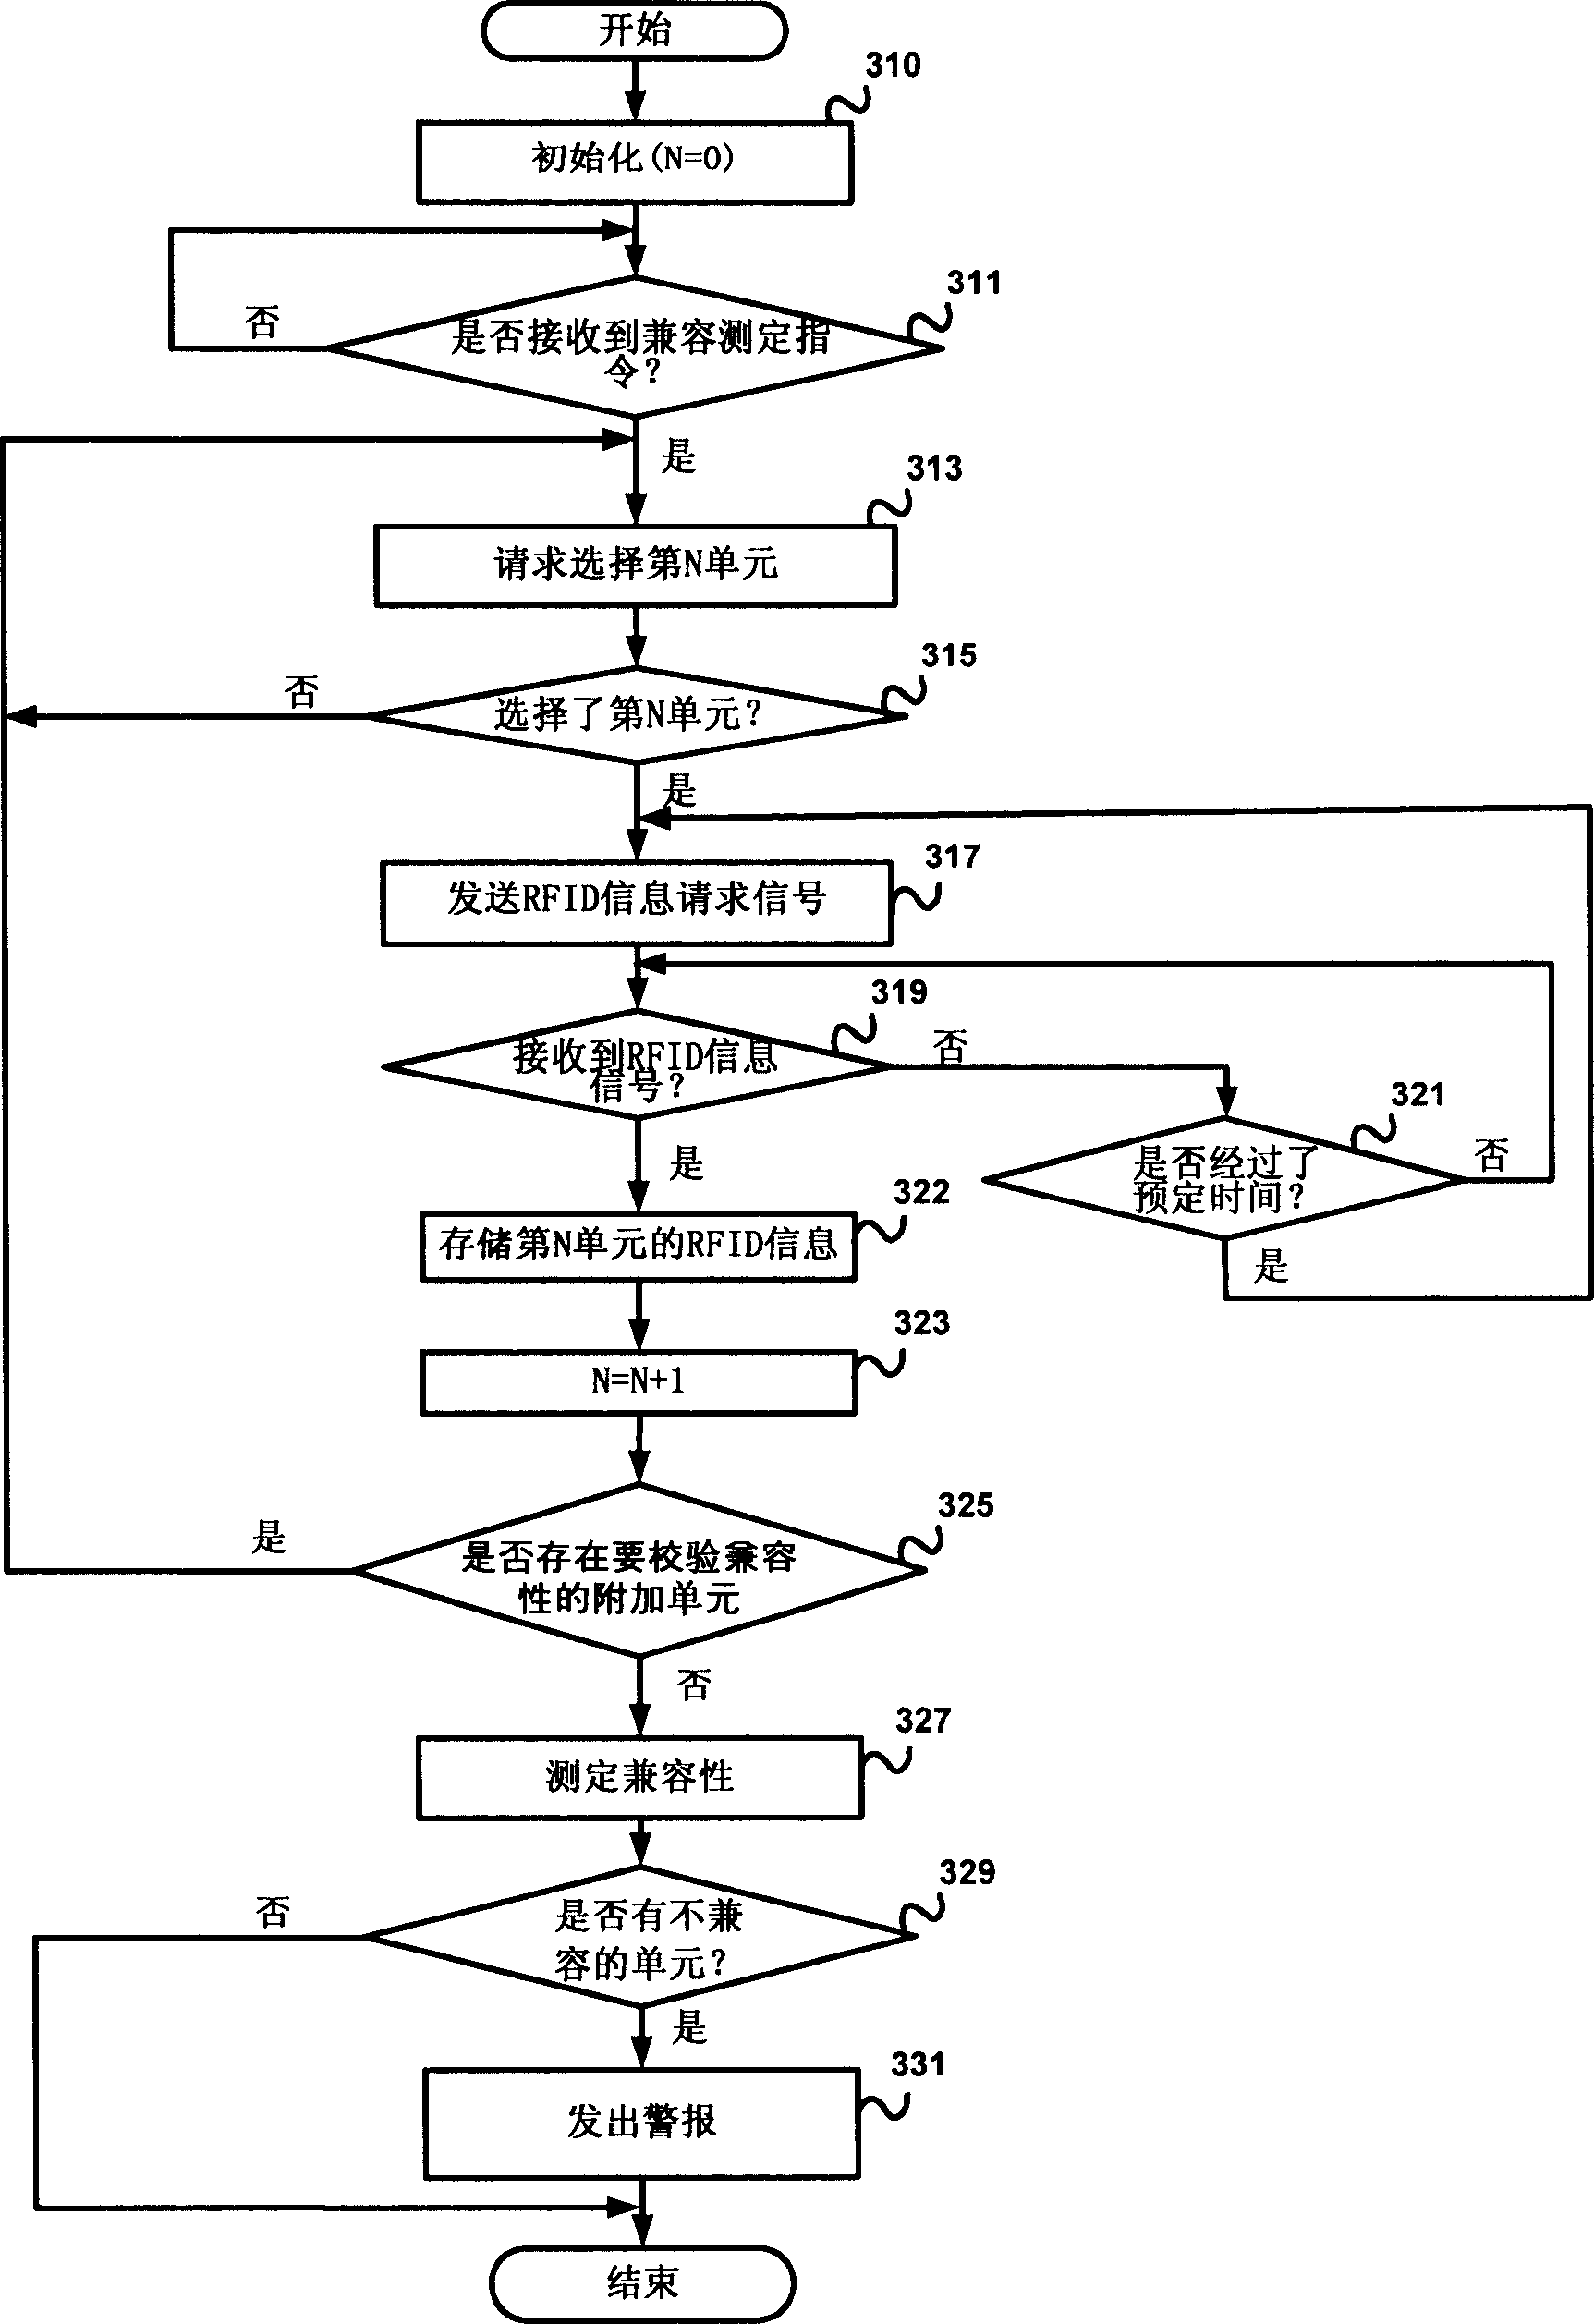 Compatibility determination apparatus and method using radio frequency identification system